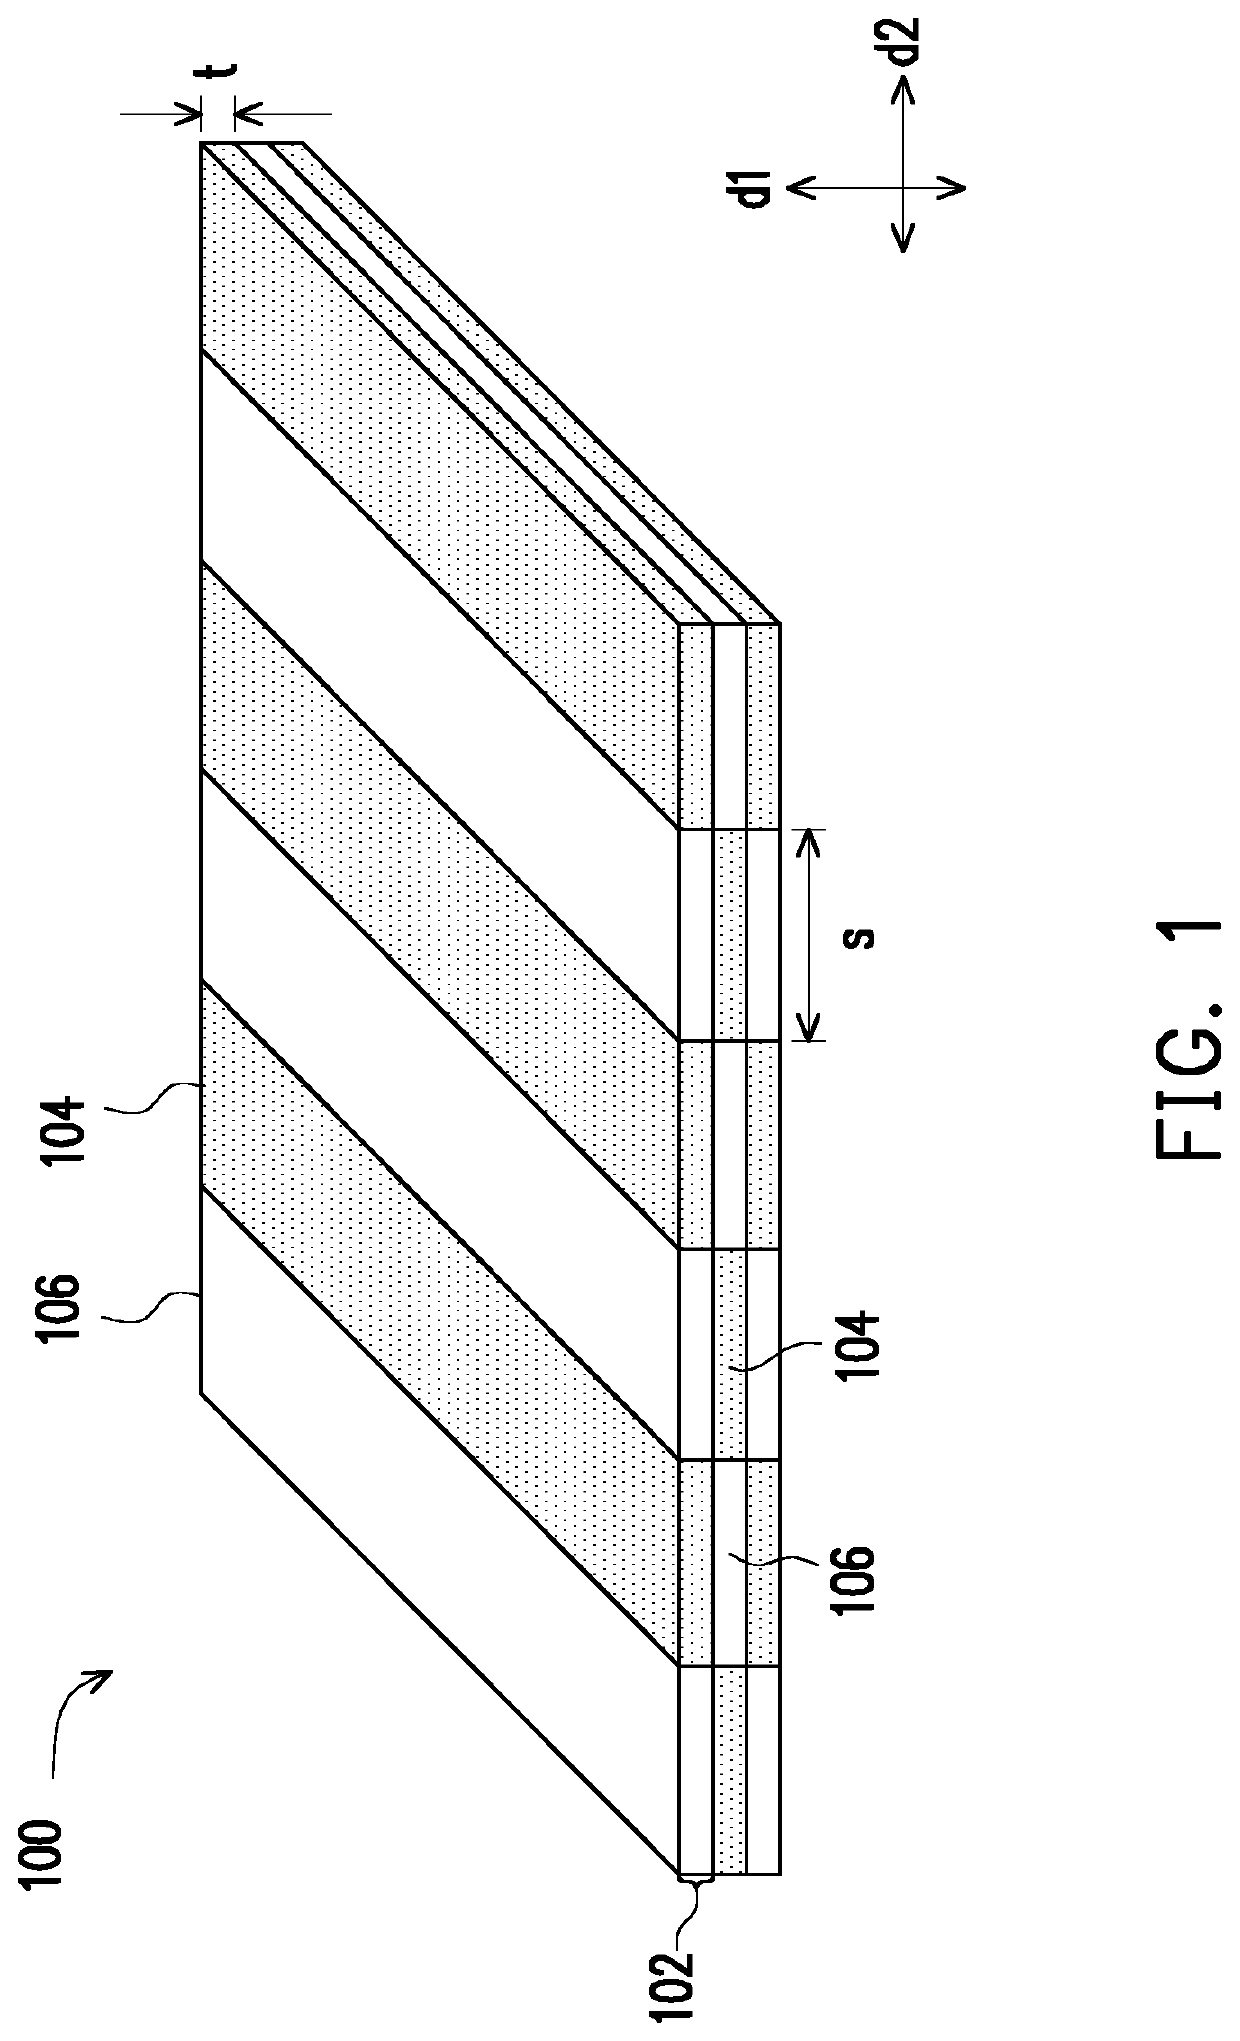 Capacitive stealth composite structure